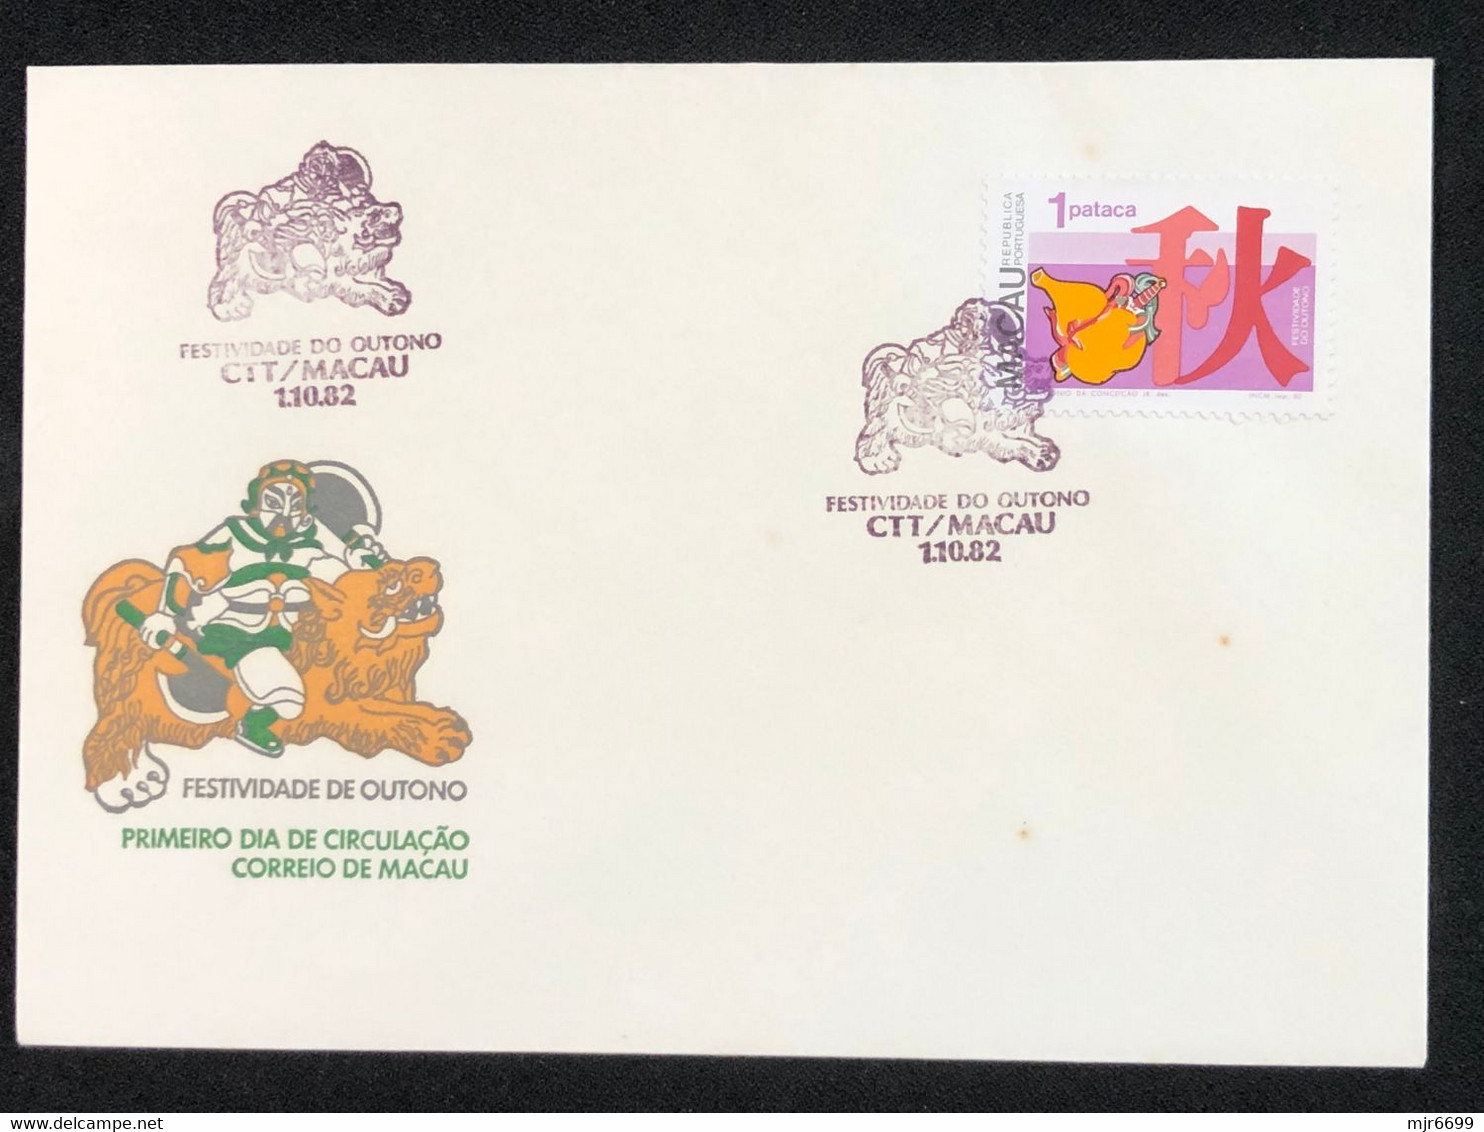 MACAU 1982 AUTUMN FESTIVAL FDC WITH 1 STAMP INSTEAD OF 4 PLEASE LOOK AT THE PICTURES - FDC